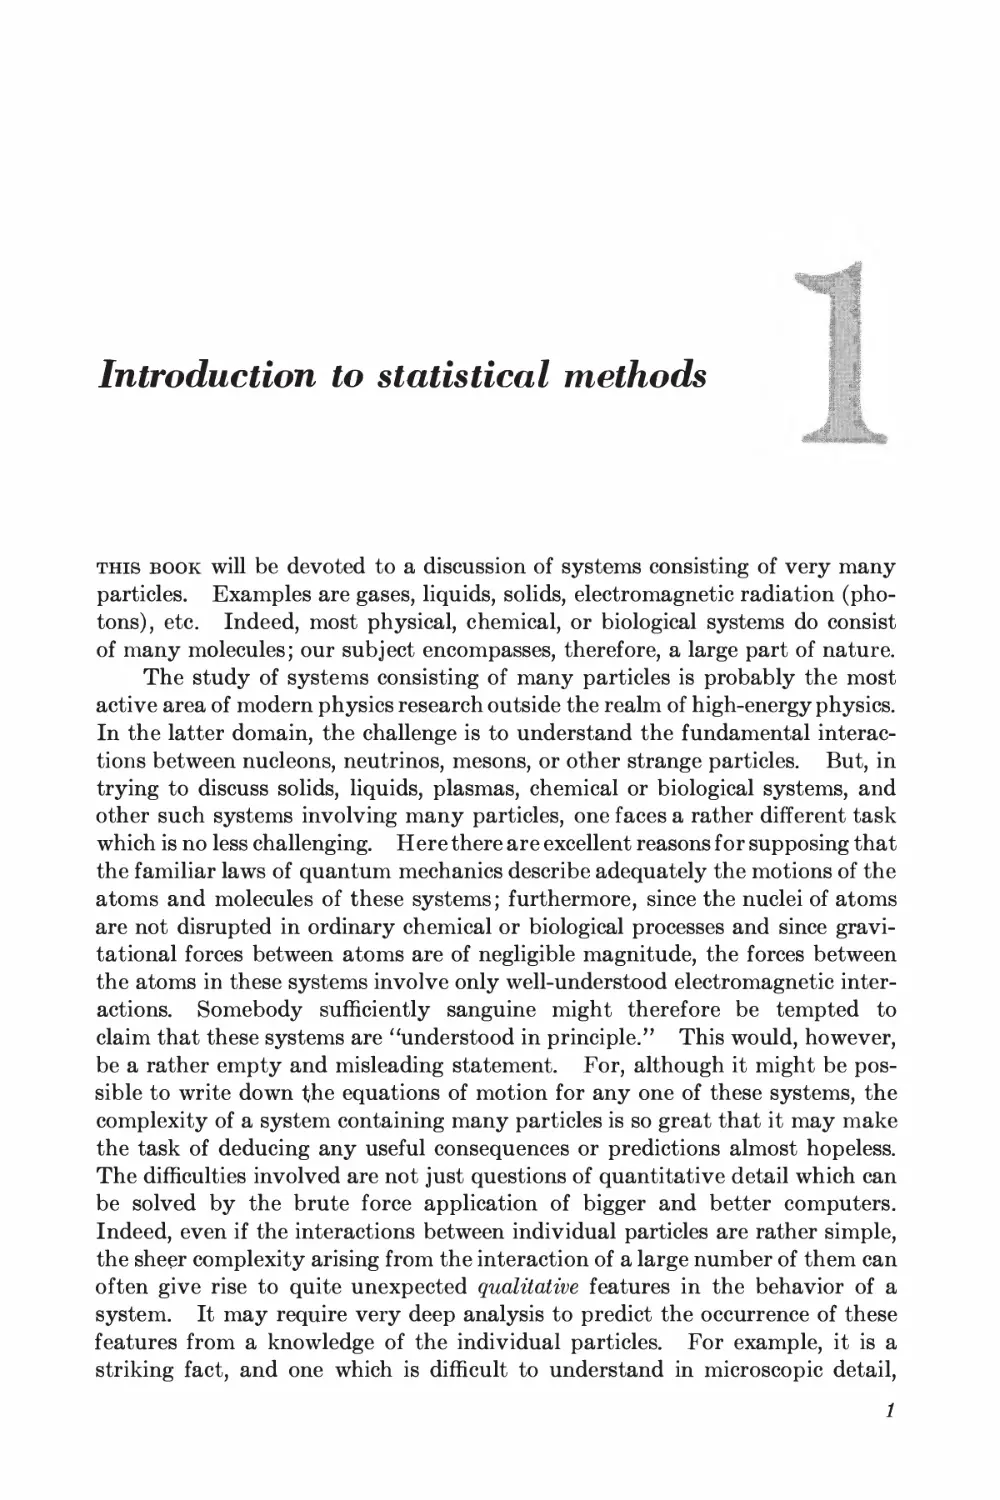 Chapter 1: Introduction to Statistical Methods